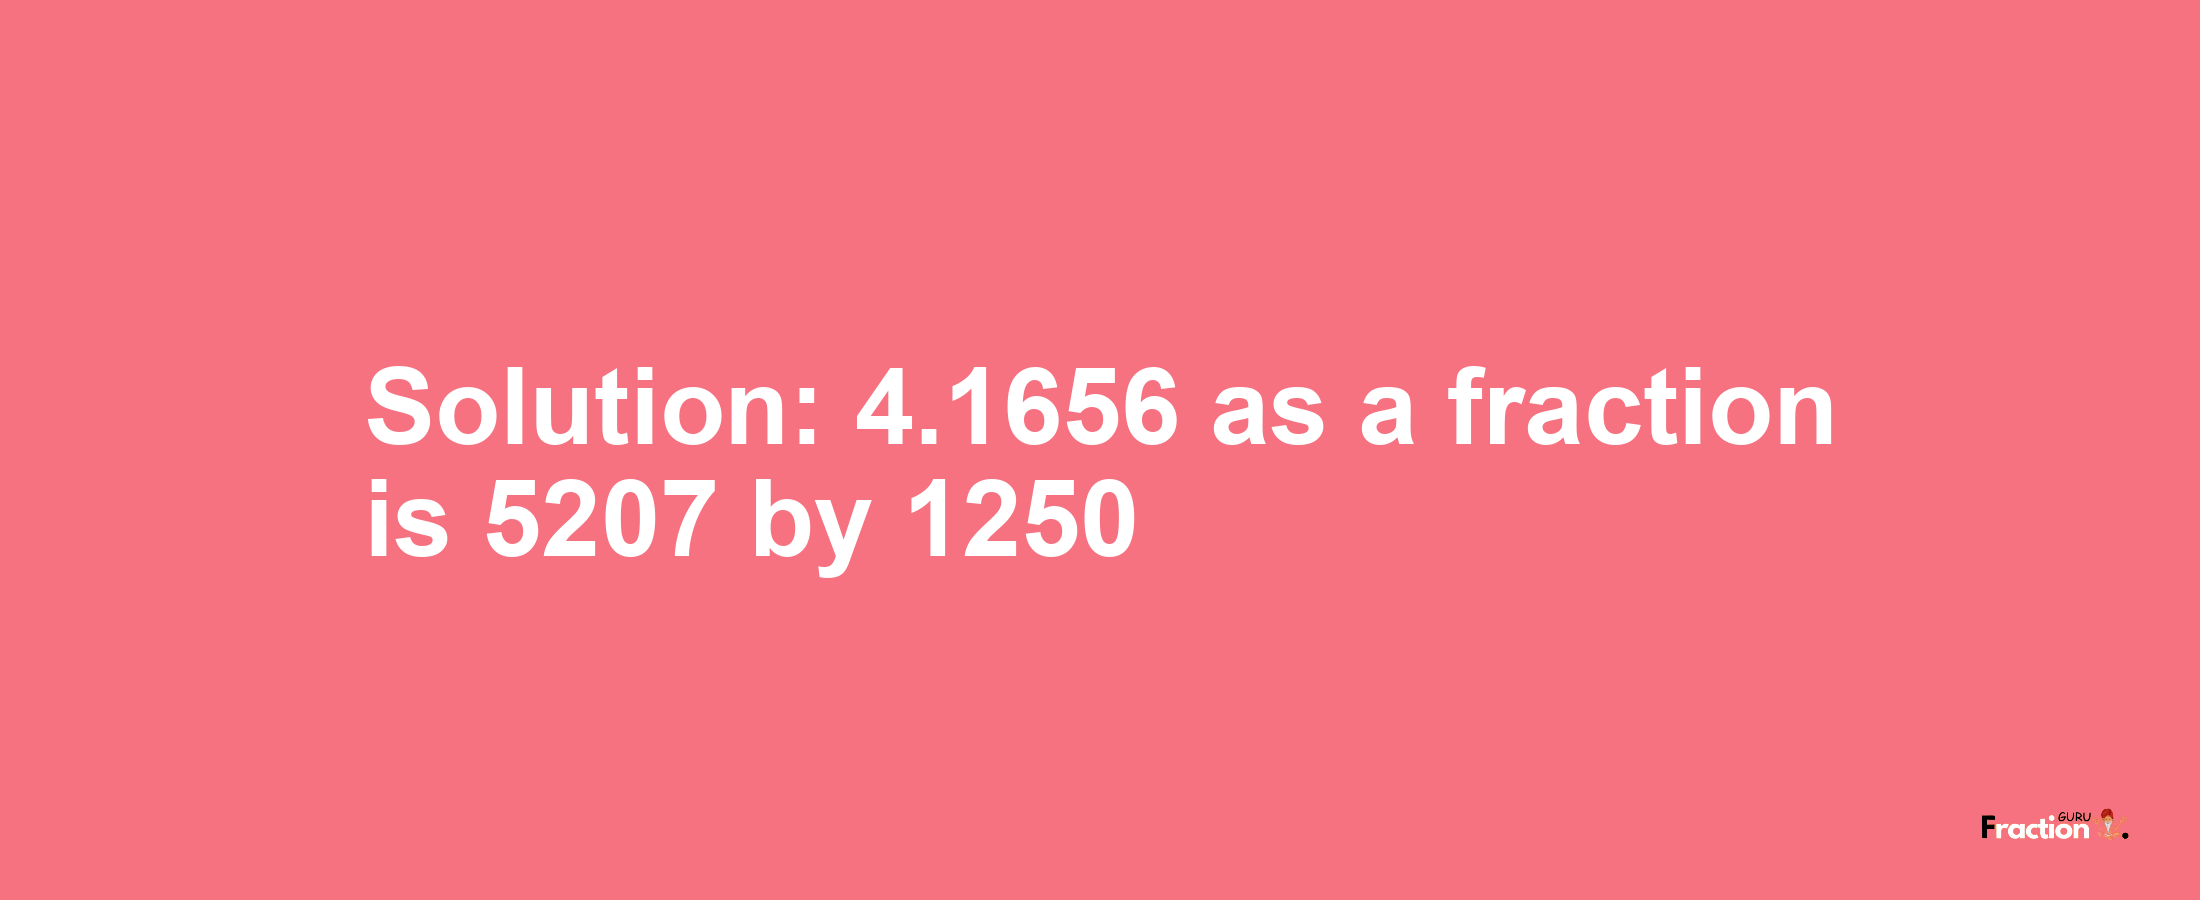 Solution:4.1656 as a fraction is 5207/1250